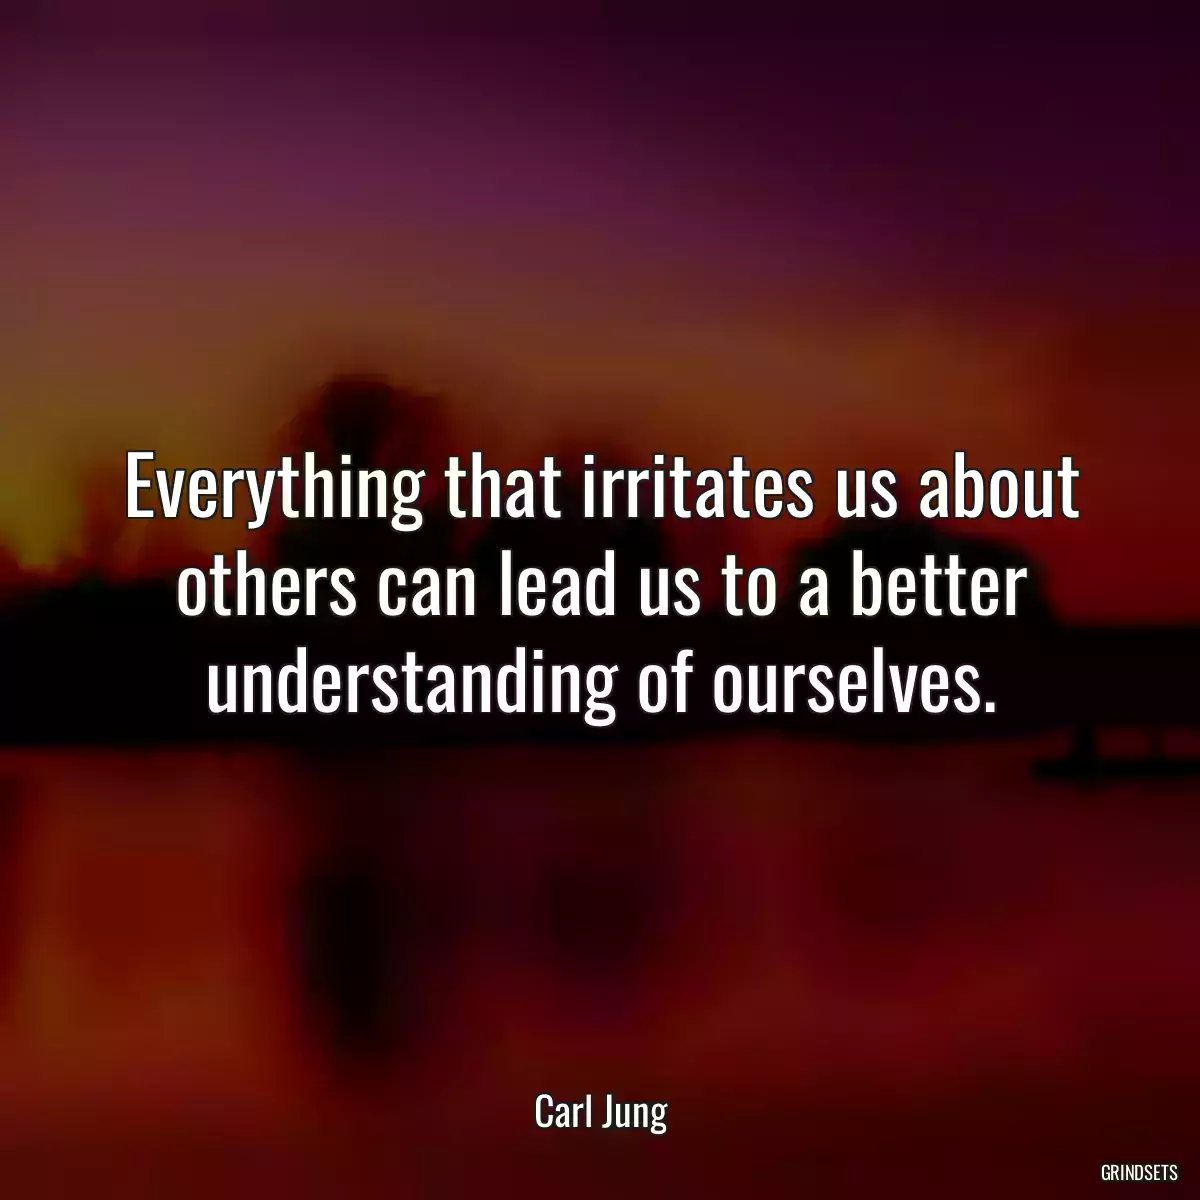 Everything that irritates us about others can lead us to a better understanding of ourselves.